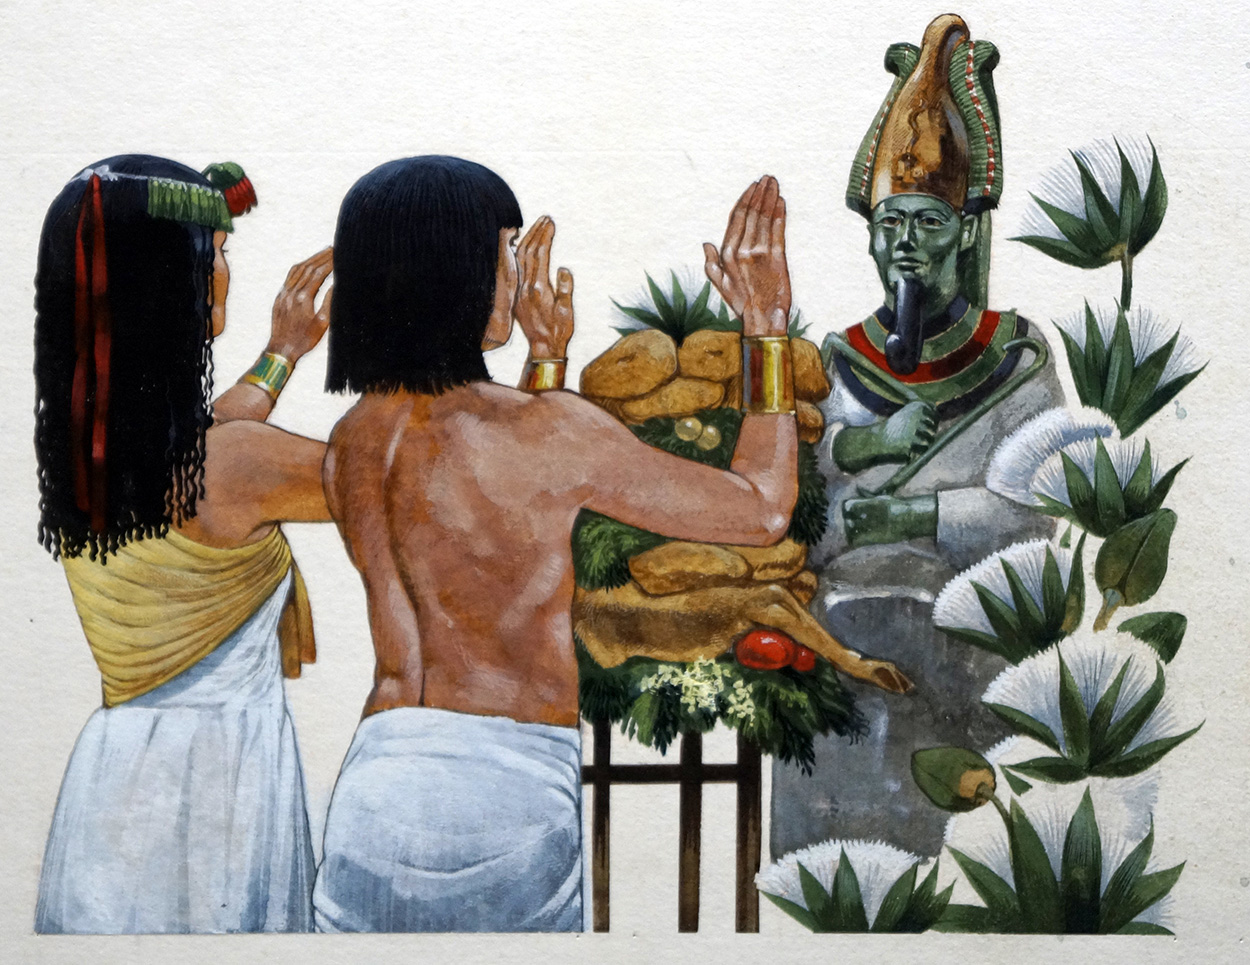 Offerings of food to the God Osiris (Original) art by Richard Hook Art at The Illustration Art Gallery